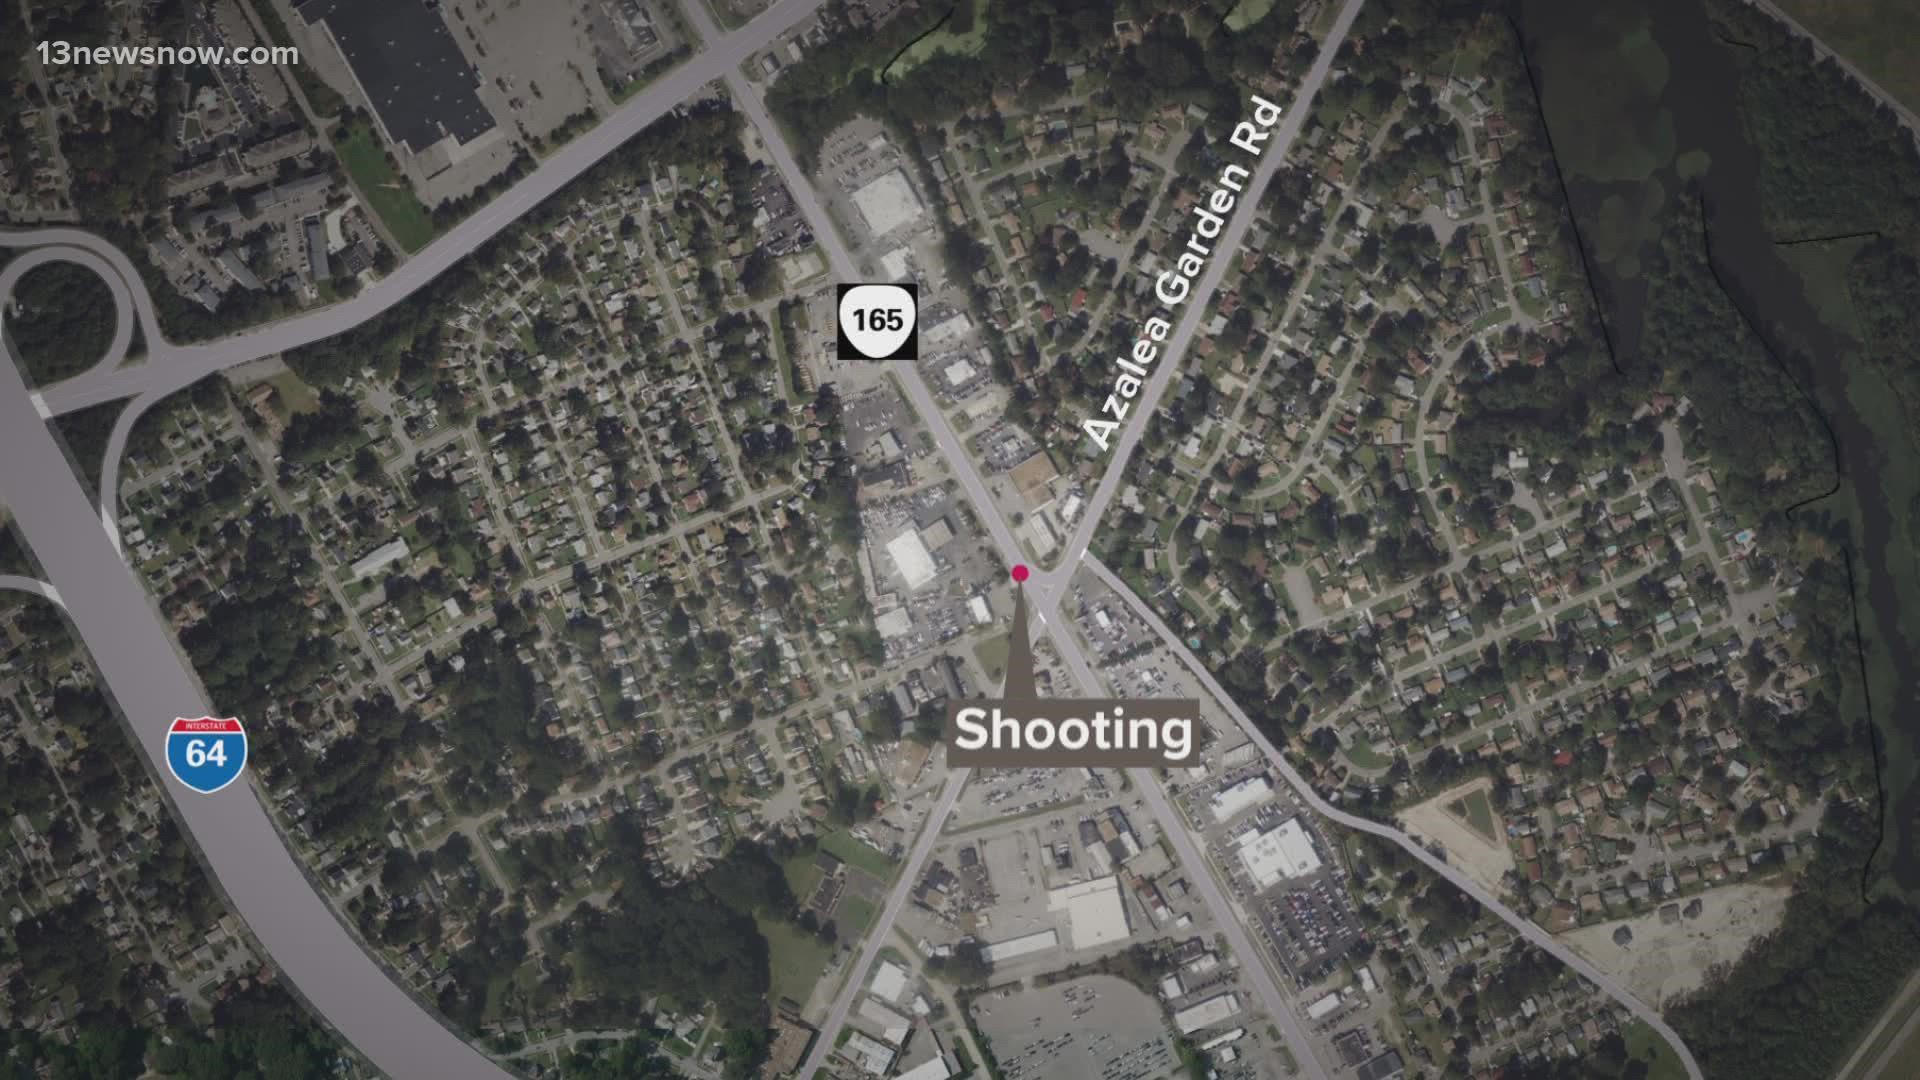 According to the department, police officers went to the 3500 block of North Military Highway, around 2 a.m. Sunday and found a man who had been shot.